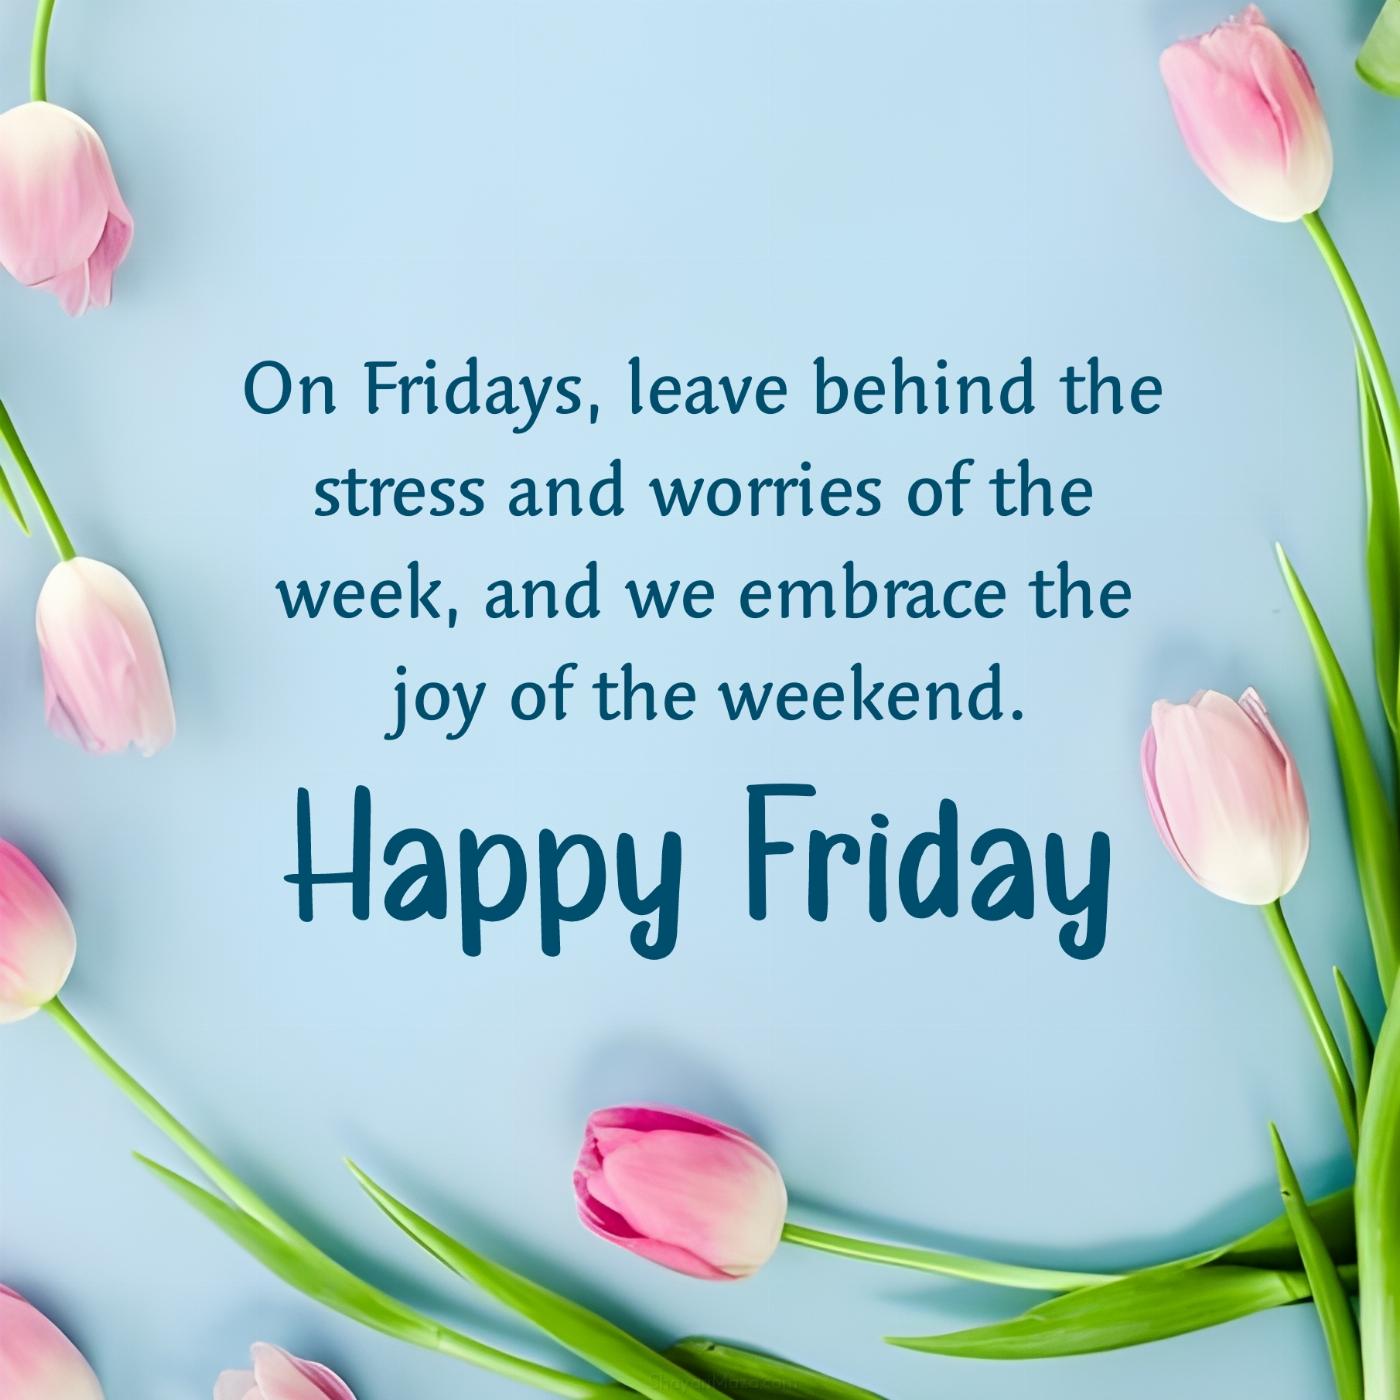 On Fridays leave behind the stress and worries of the week